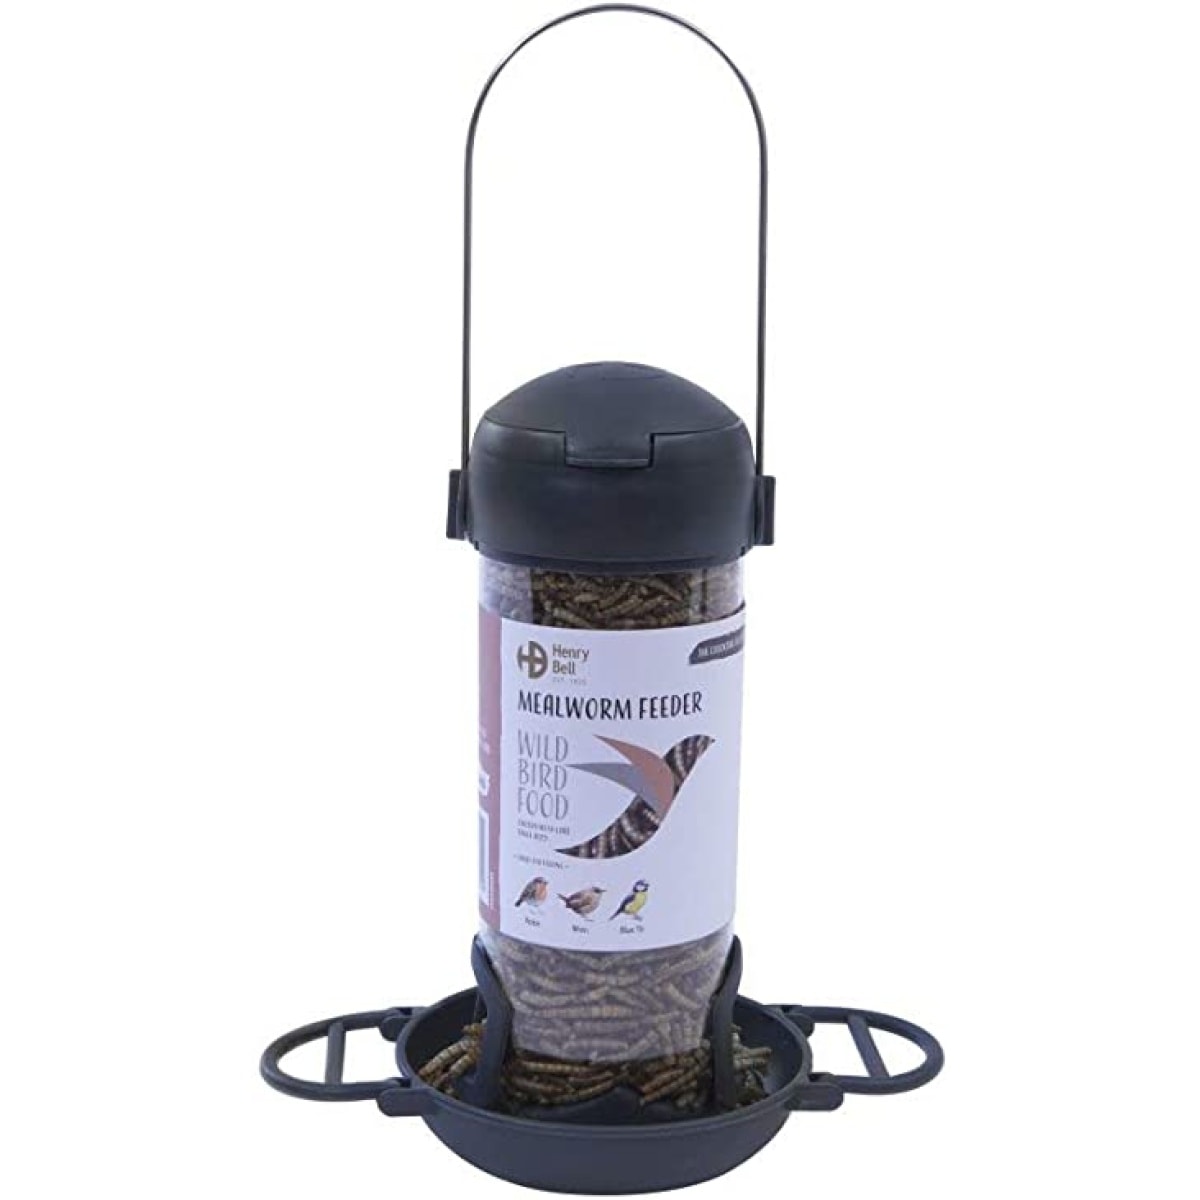 Henry Bell Ready to Use Feeder – Mealworm Main Image